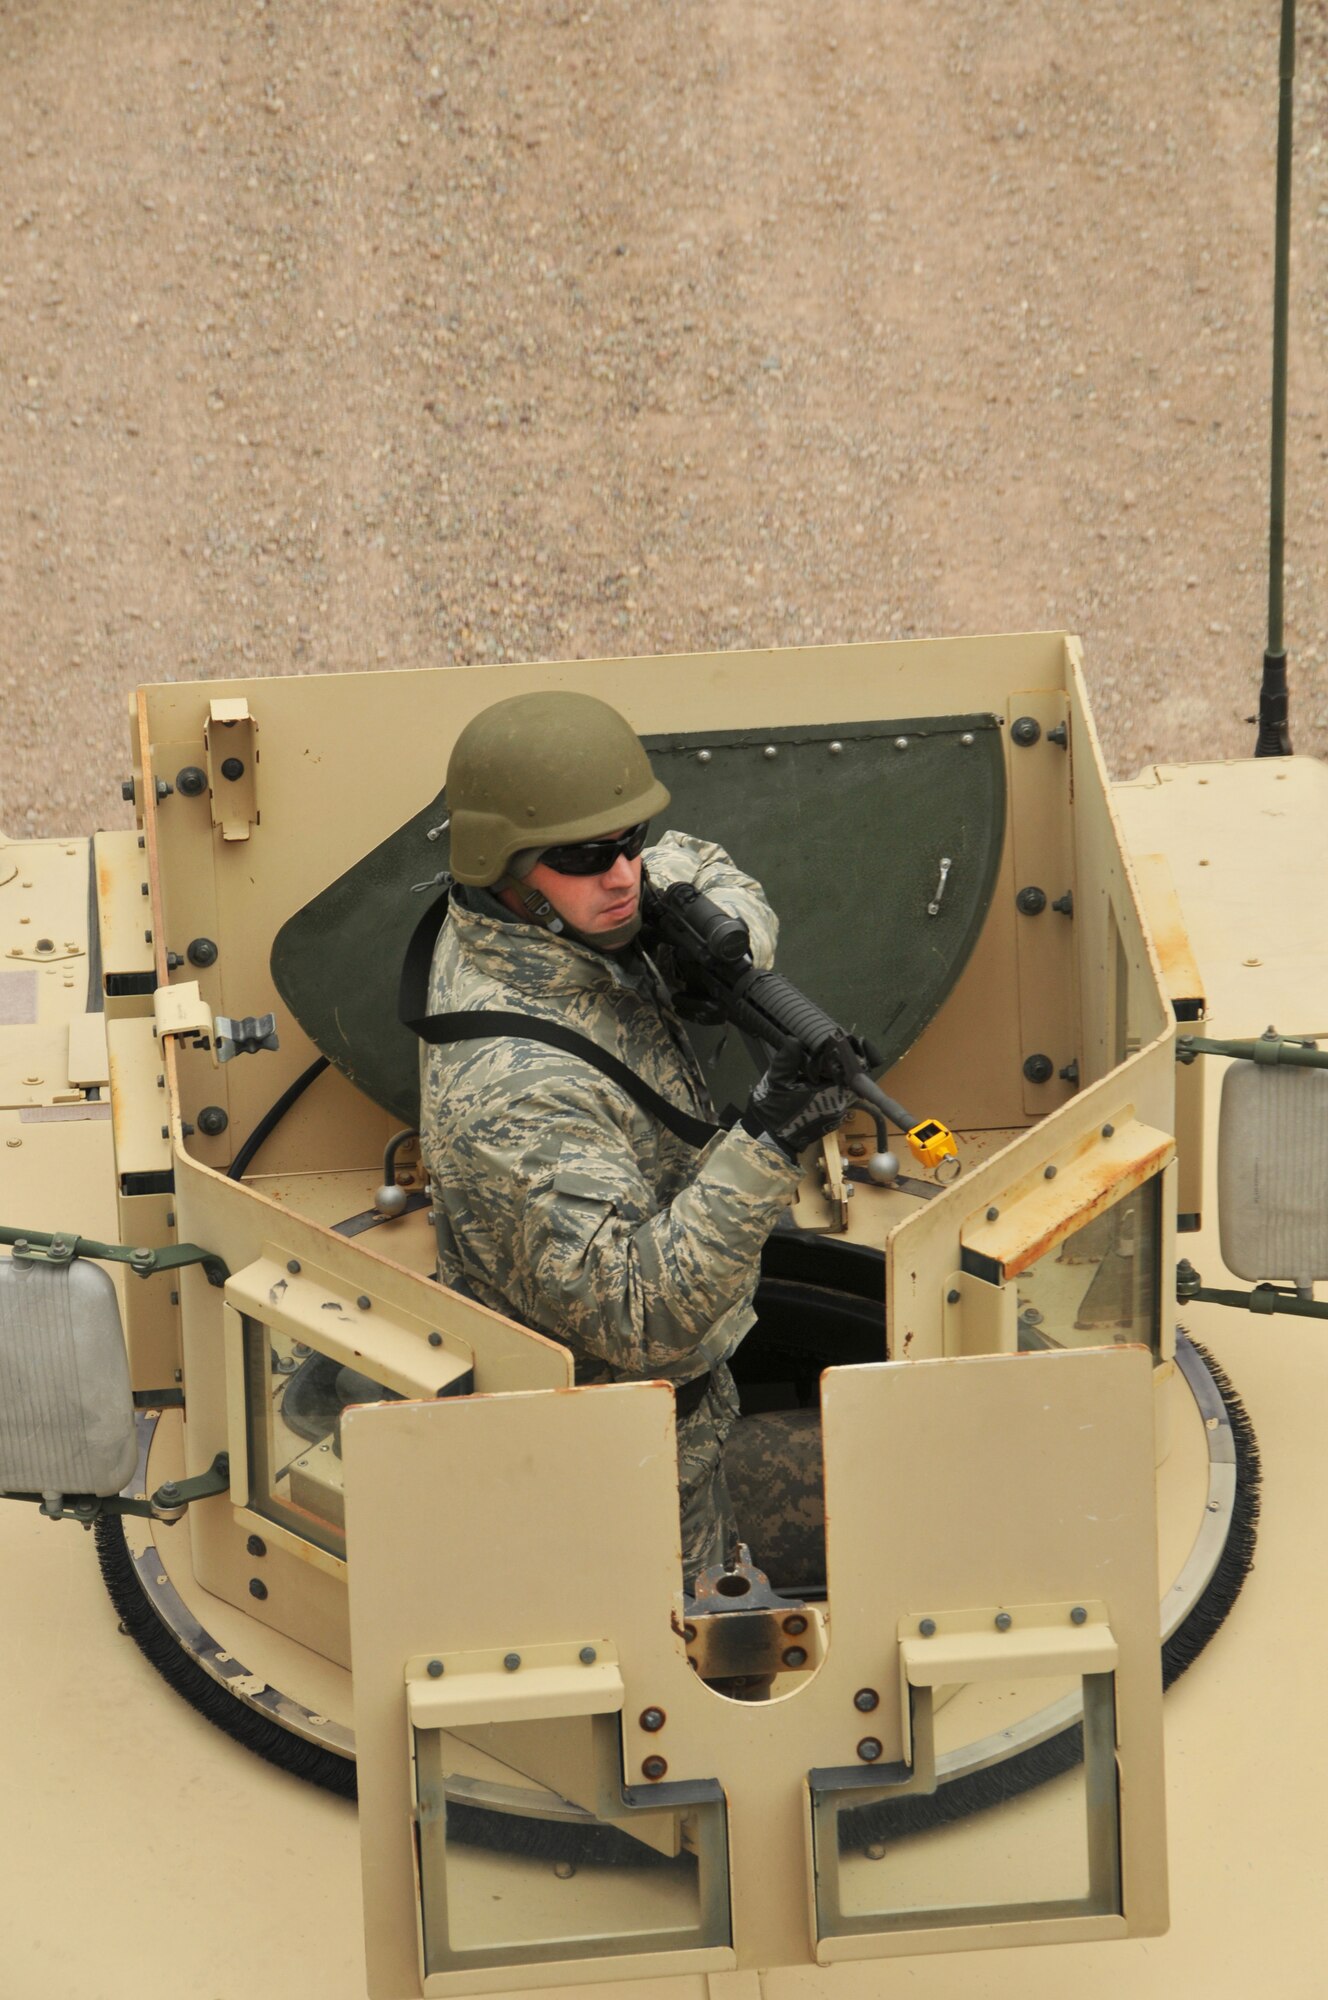 An Airman from the 120th Civil Engineer Squadron, Montana Air National Guard, provides over watch from a Humvee during convoy training April 30, 2016, at Fort Harrison in Helena, Mont. Members of the 120th Mission Support Group participated in a field training exercise that tested their contingency skills in a simulated combat environment. (U.S. Air National Guard photo by Tech. Sgt. Christy Mason)